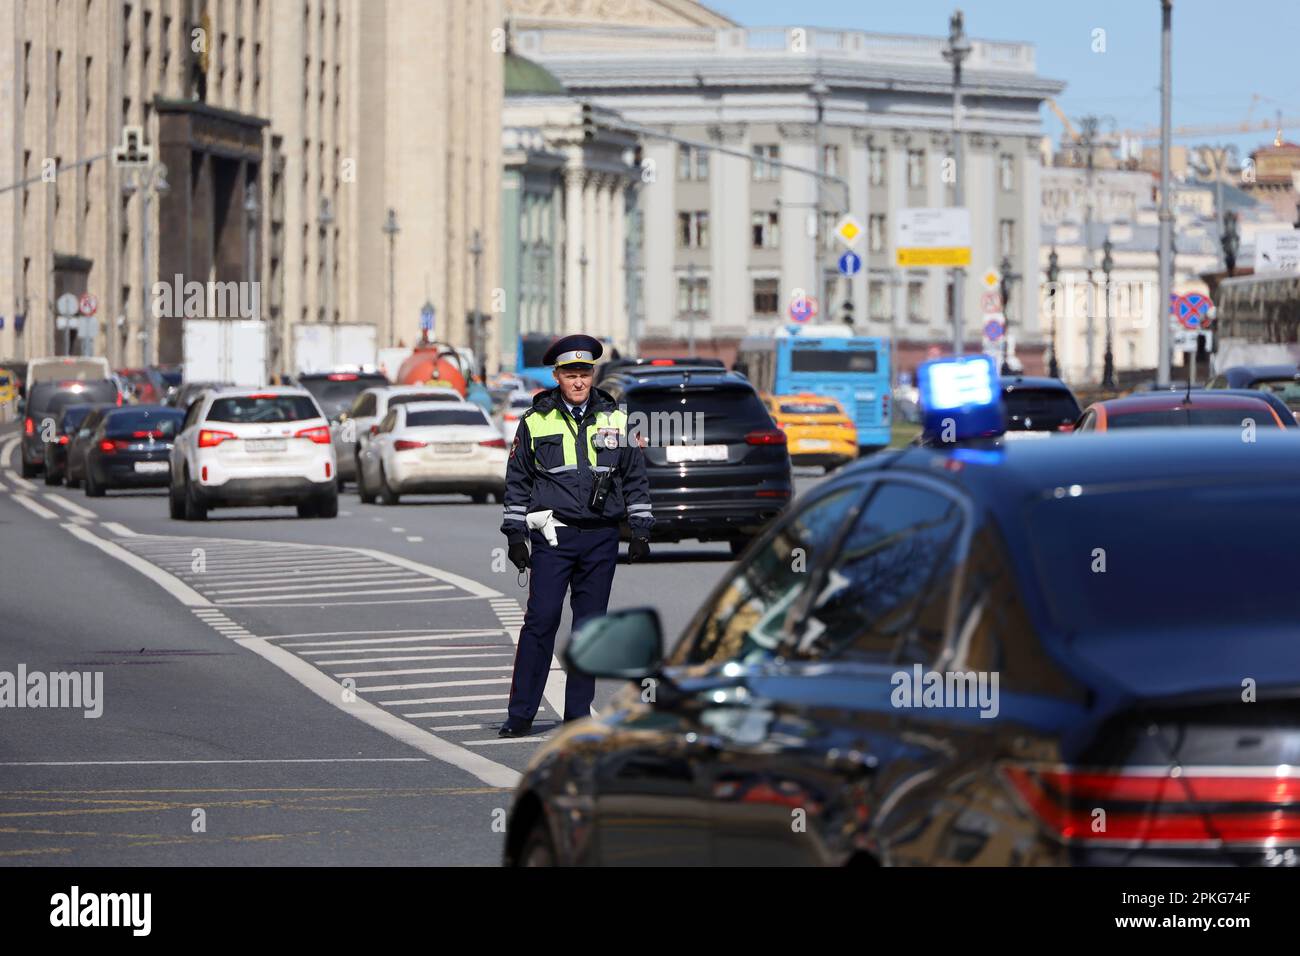 Traffic police officer standing against cars and State Duma building, car with flashing light in foreground. Policeman patrol the city street Stock Photo